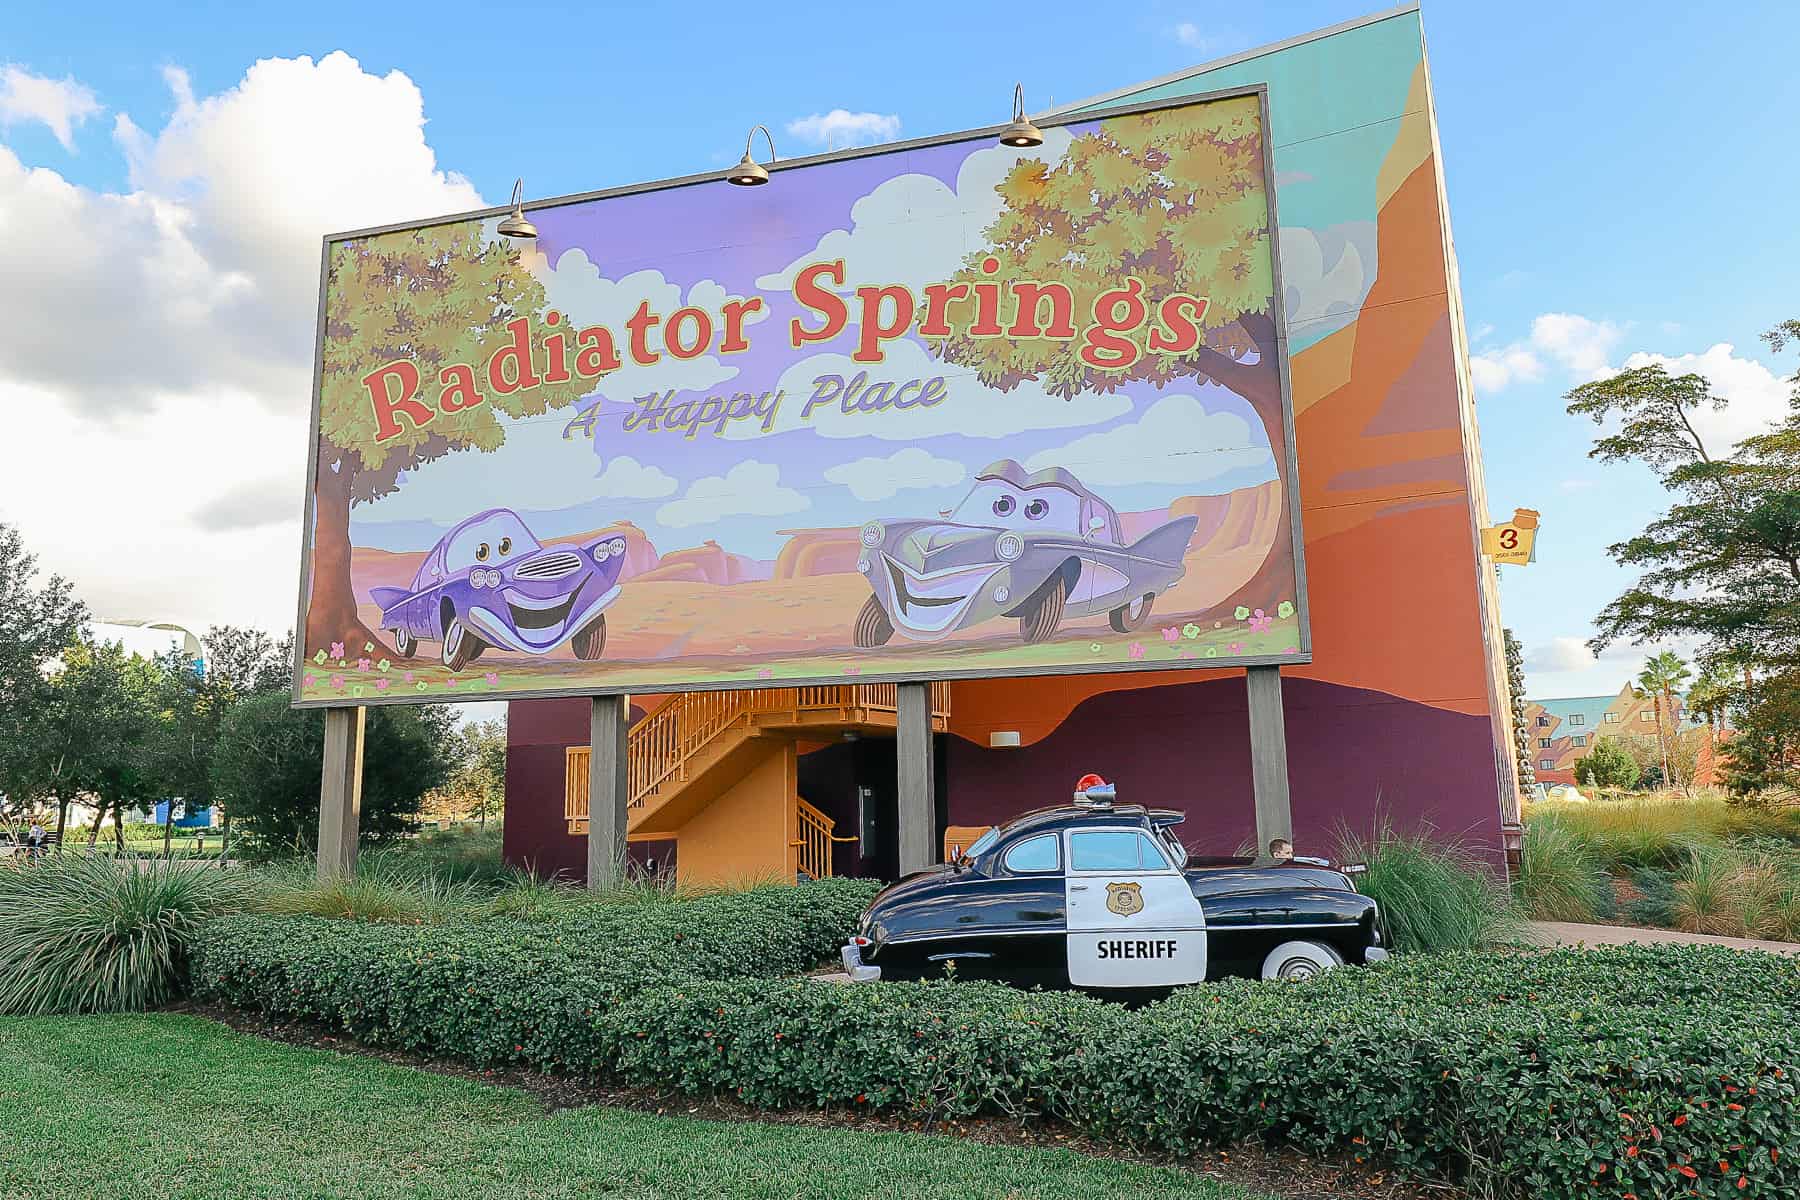 Sheriff at the entrance of the Cars Hotel area at Disney World 